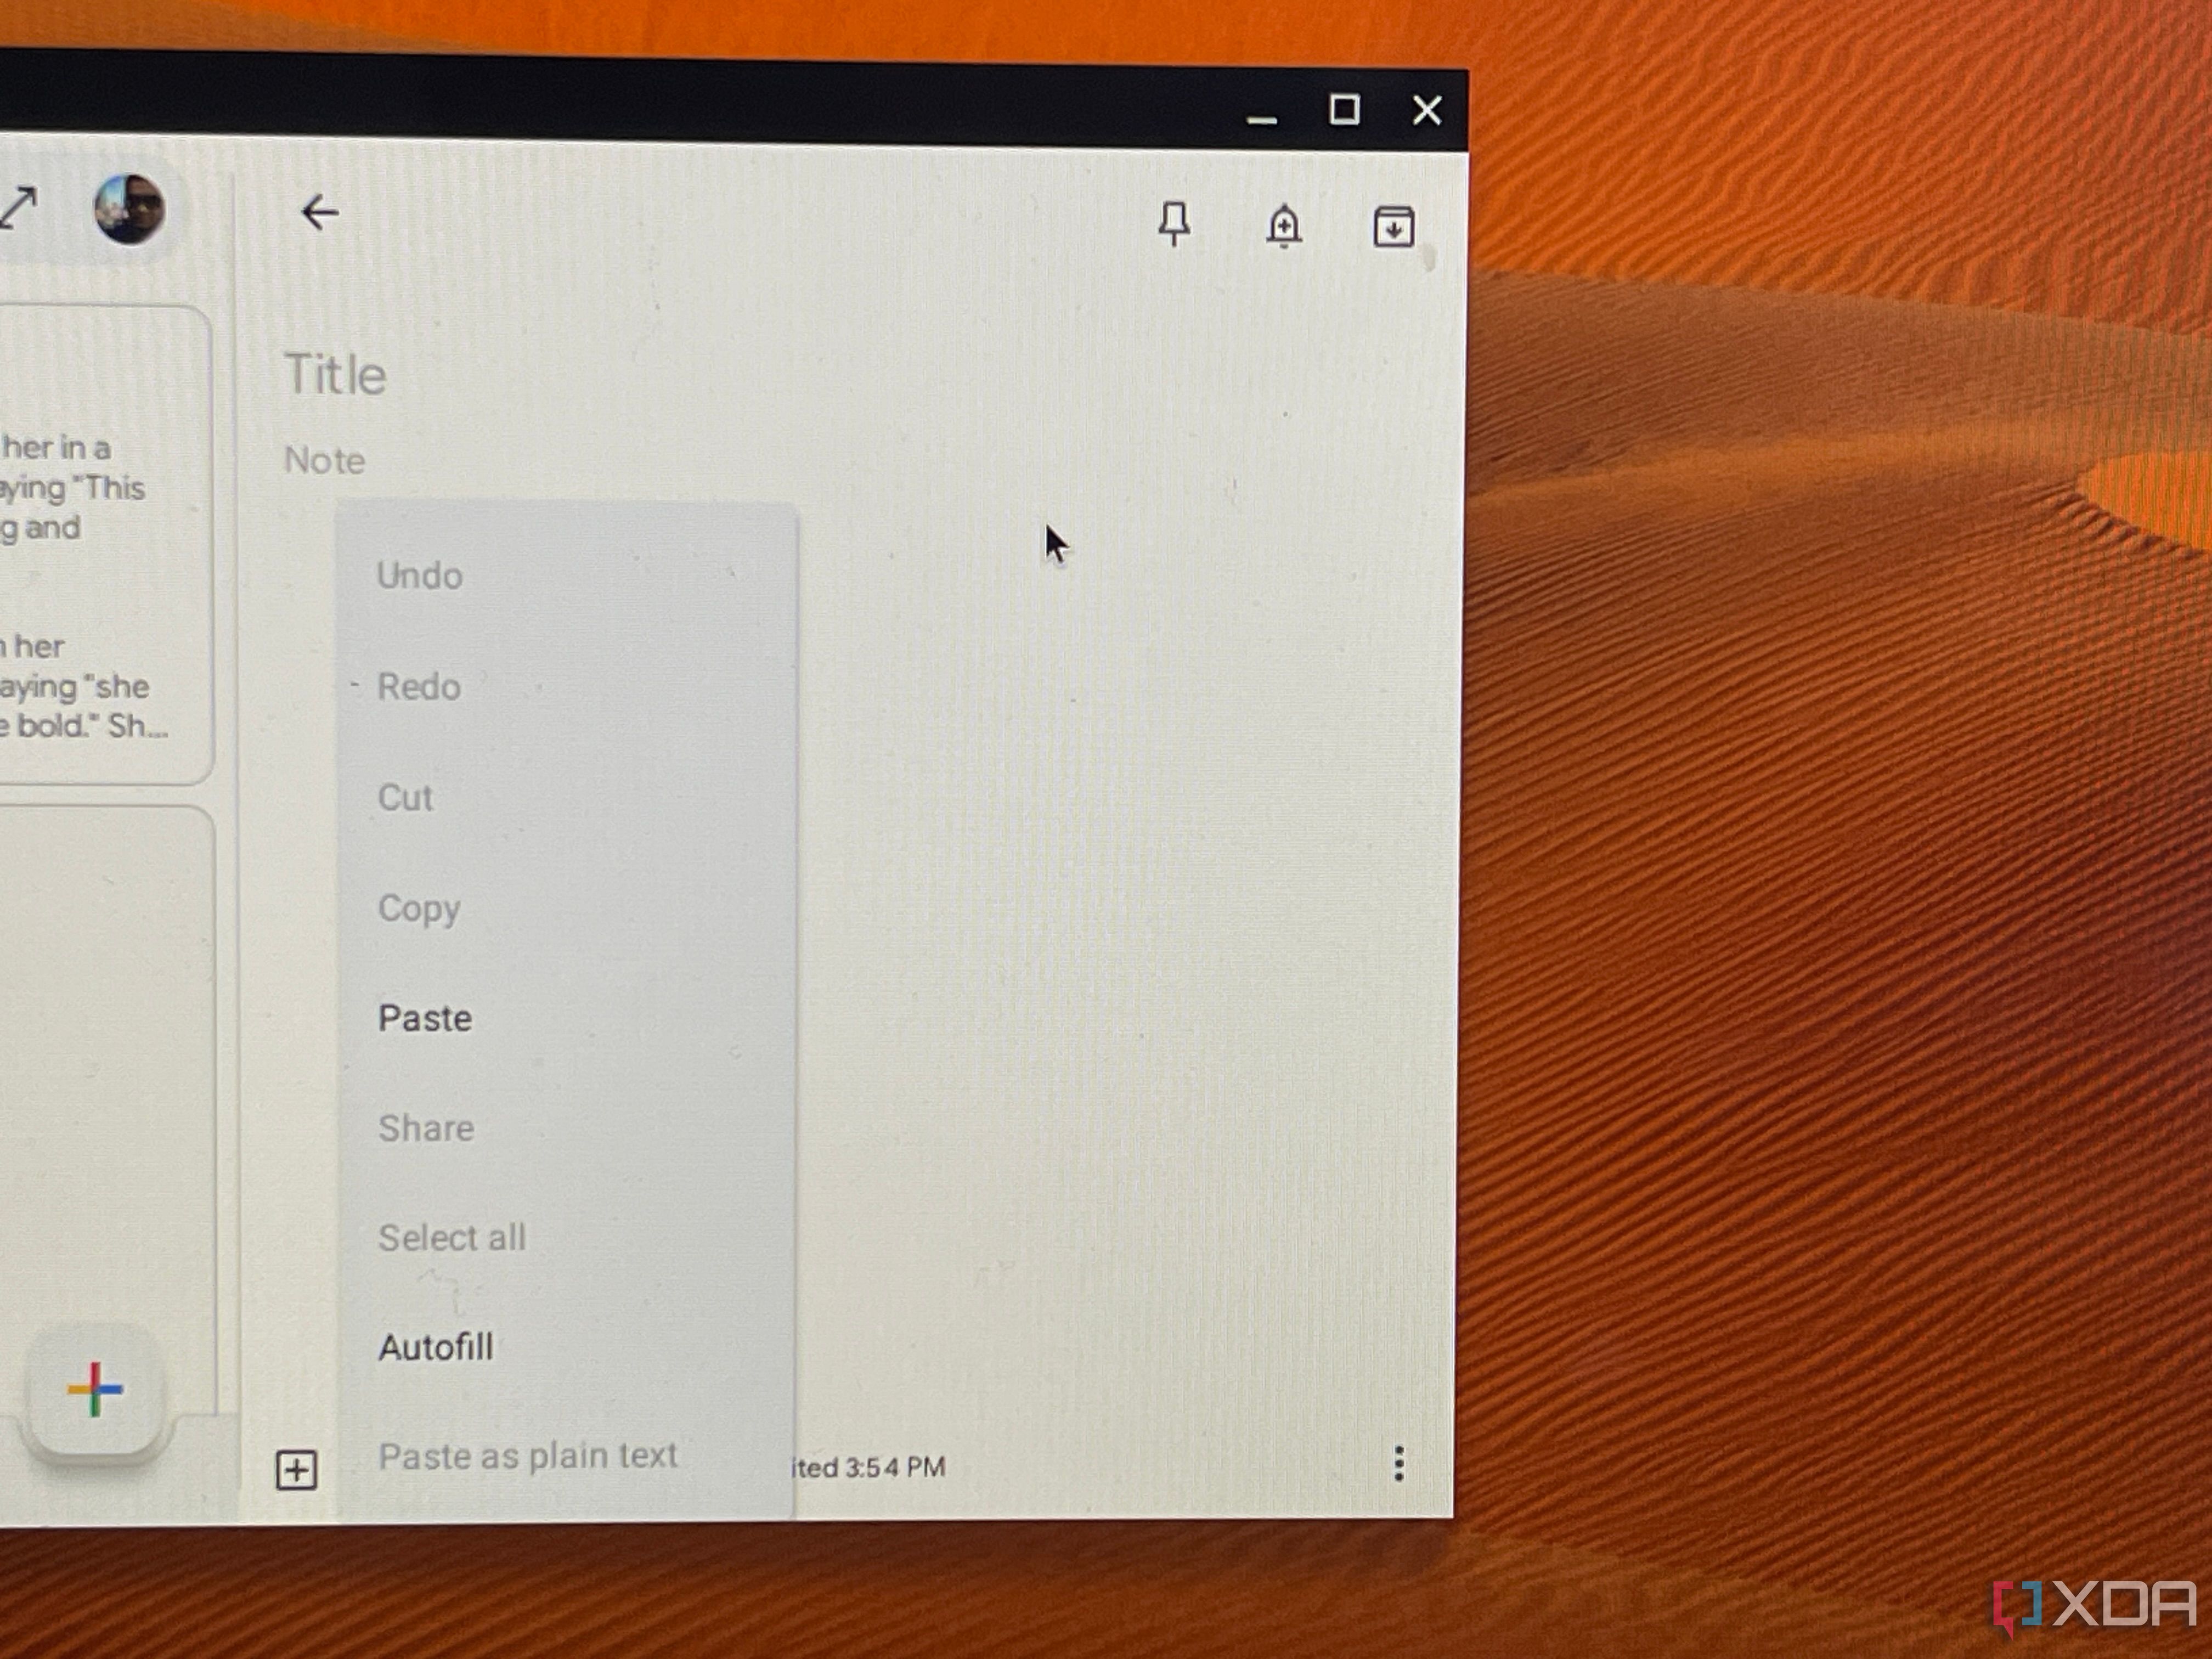 Pasting a word in ChromeOS notes app